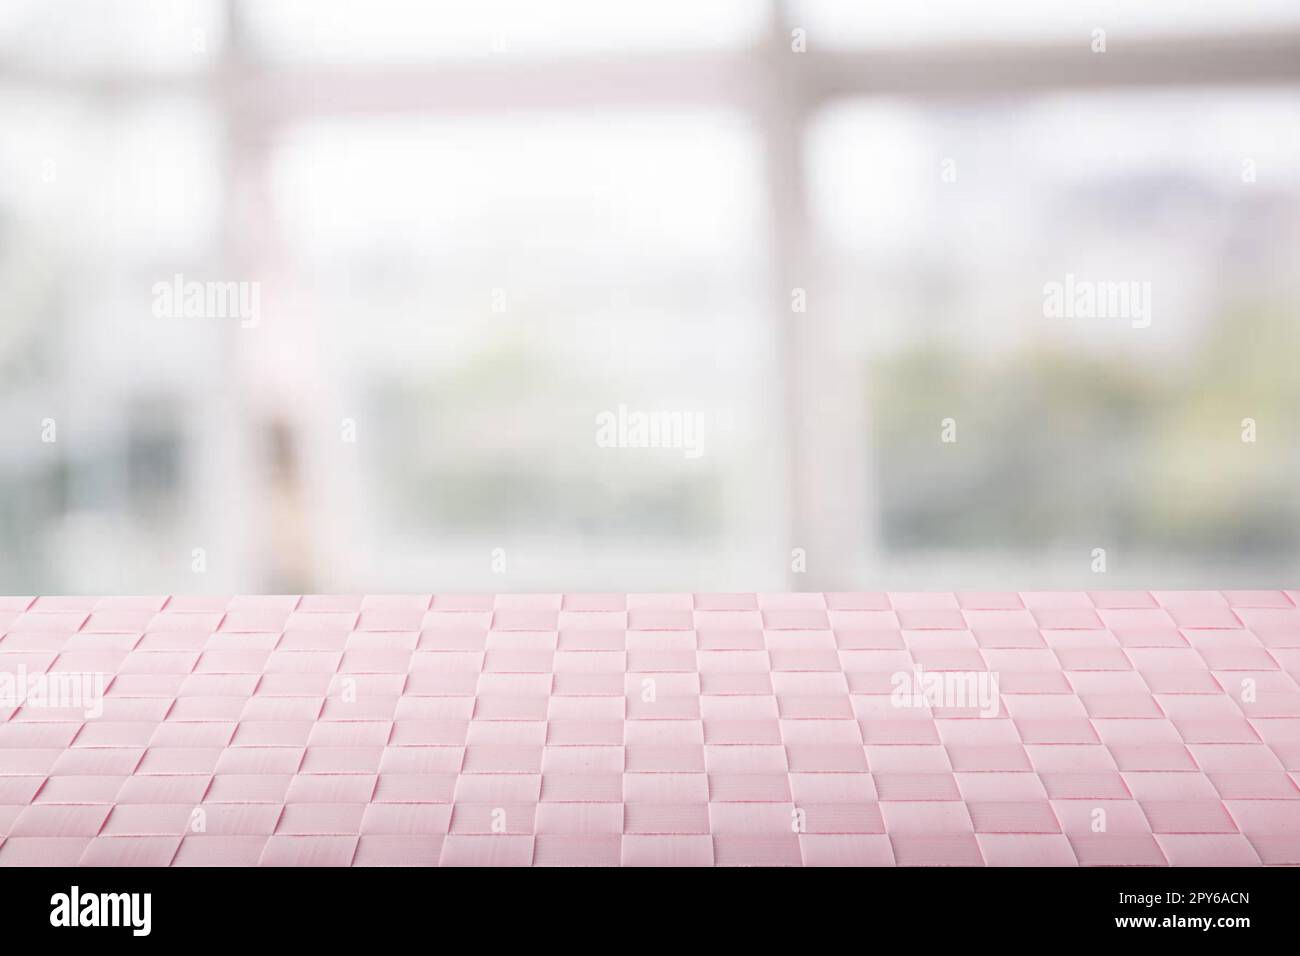 Empty table product. Closeup of a empty pink tablecloth or napkin on table over abstract blurred bright windows background. Template for your food and product display montage. Stock Photo